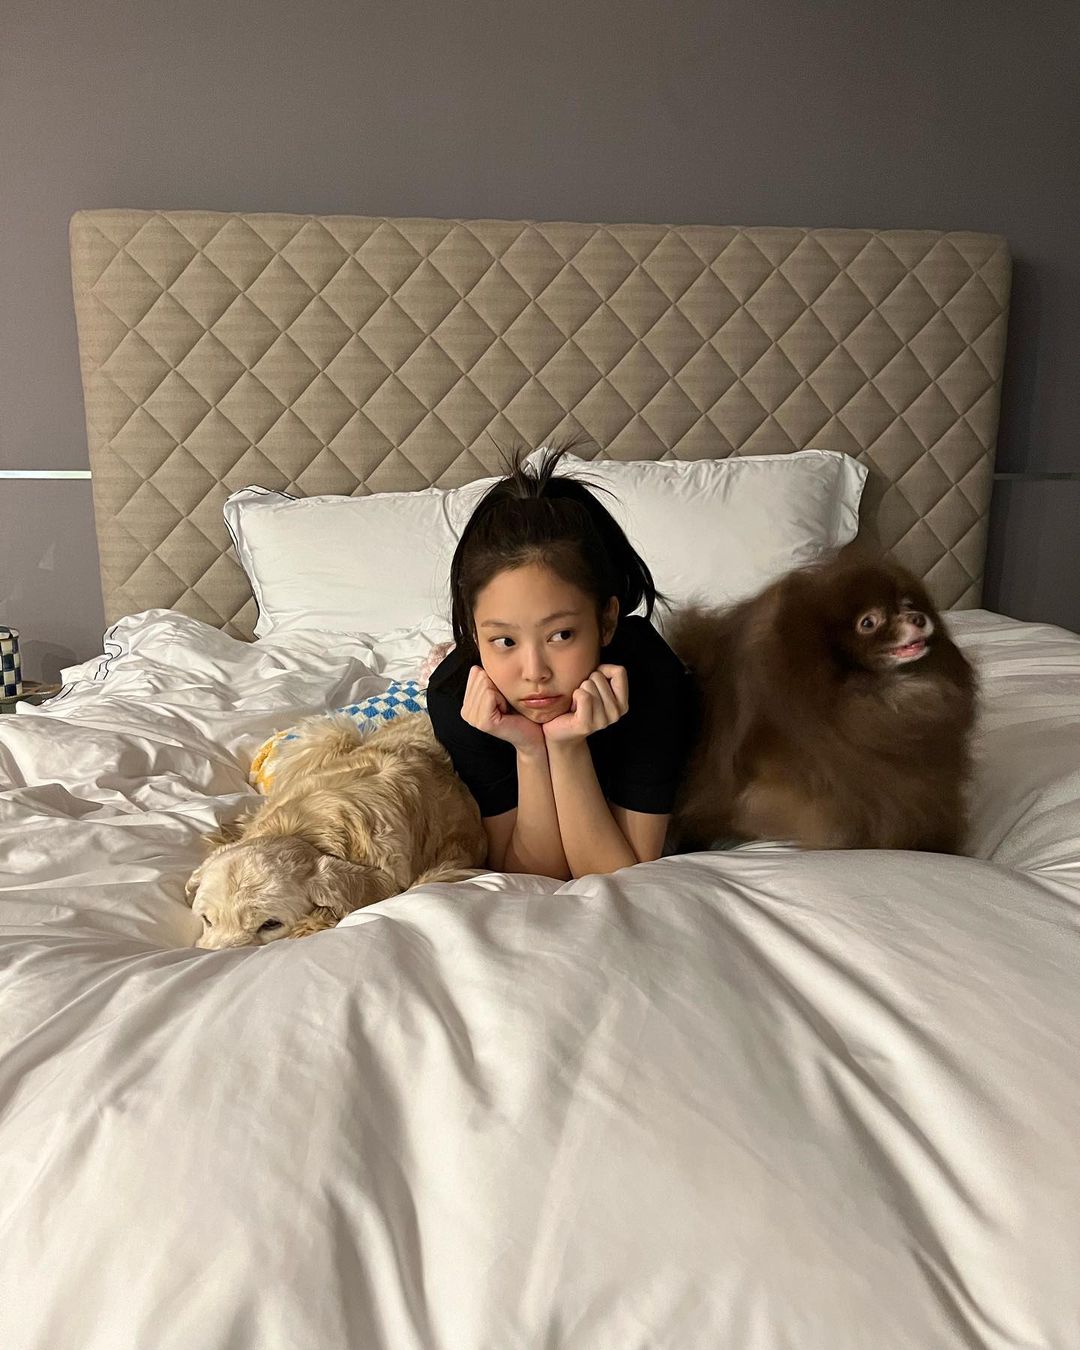 Jennie wears a crop top and has a healing time with her dogs